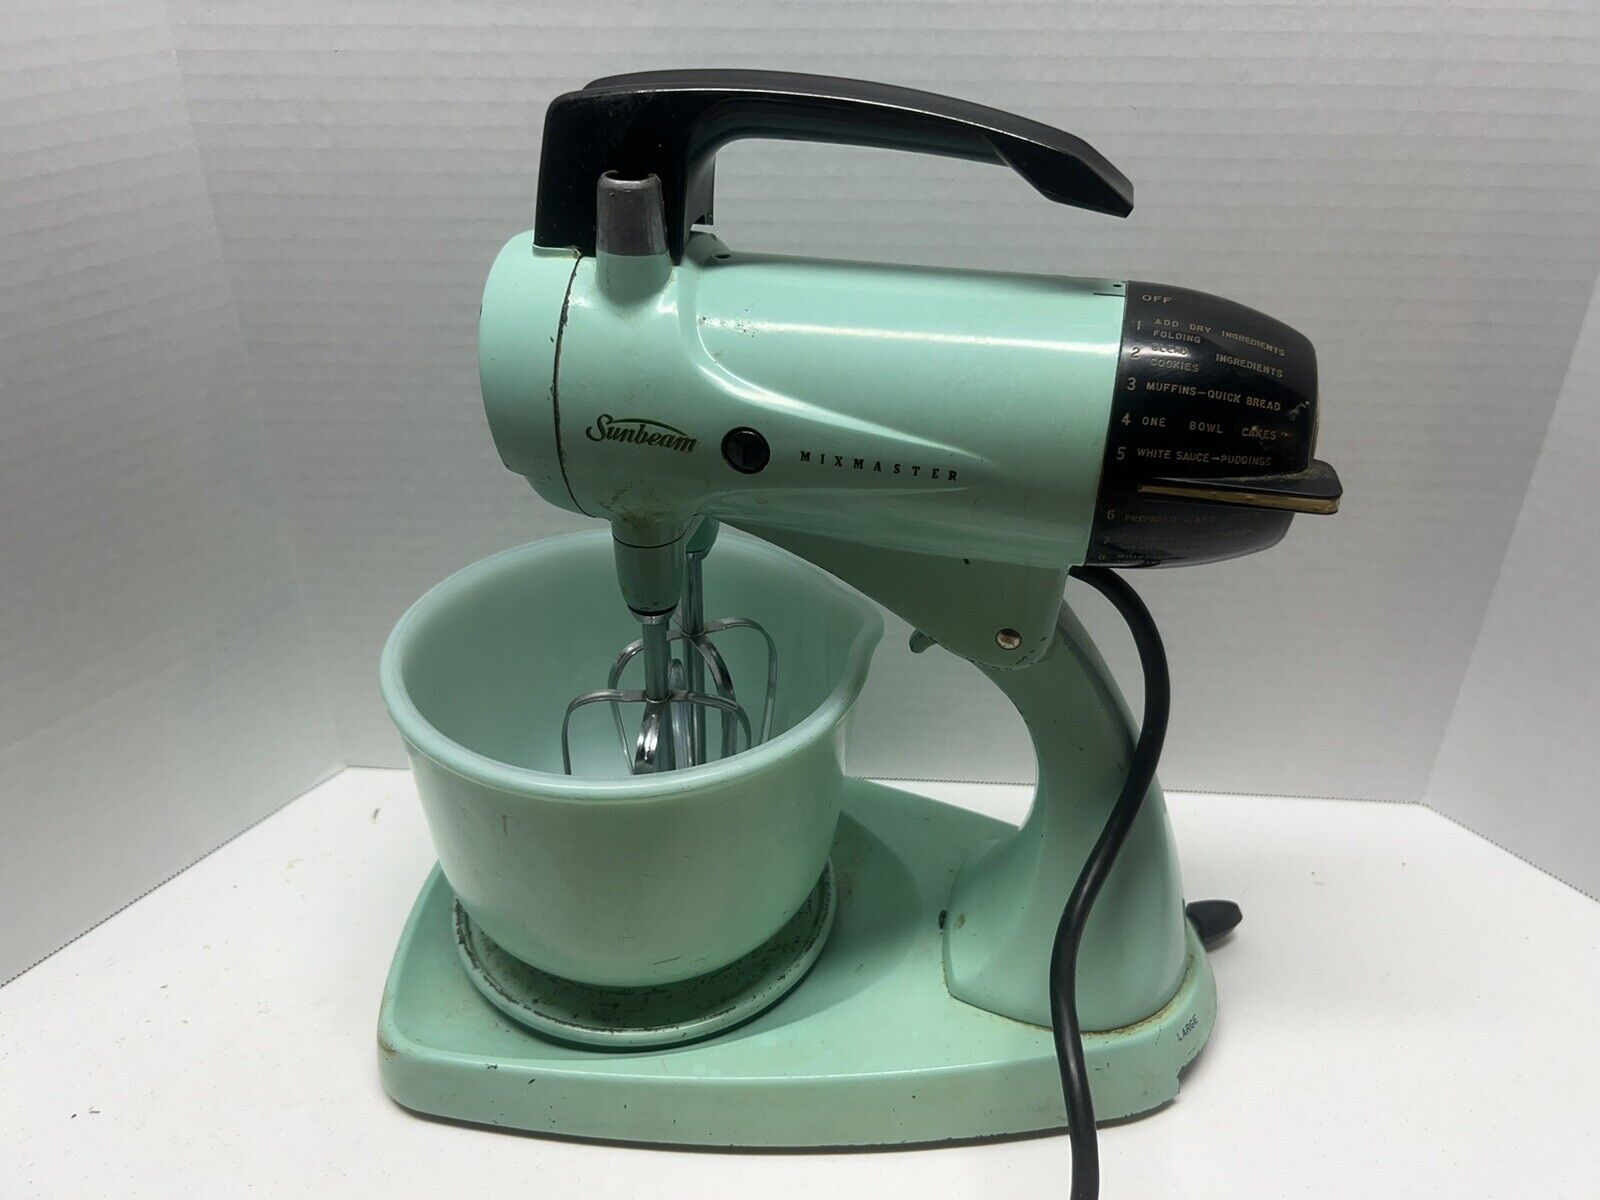 Vintage 1950s Sunbeam Mixmaster Turquoise Blue Stand Mixer Tested Works